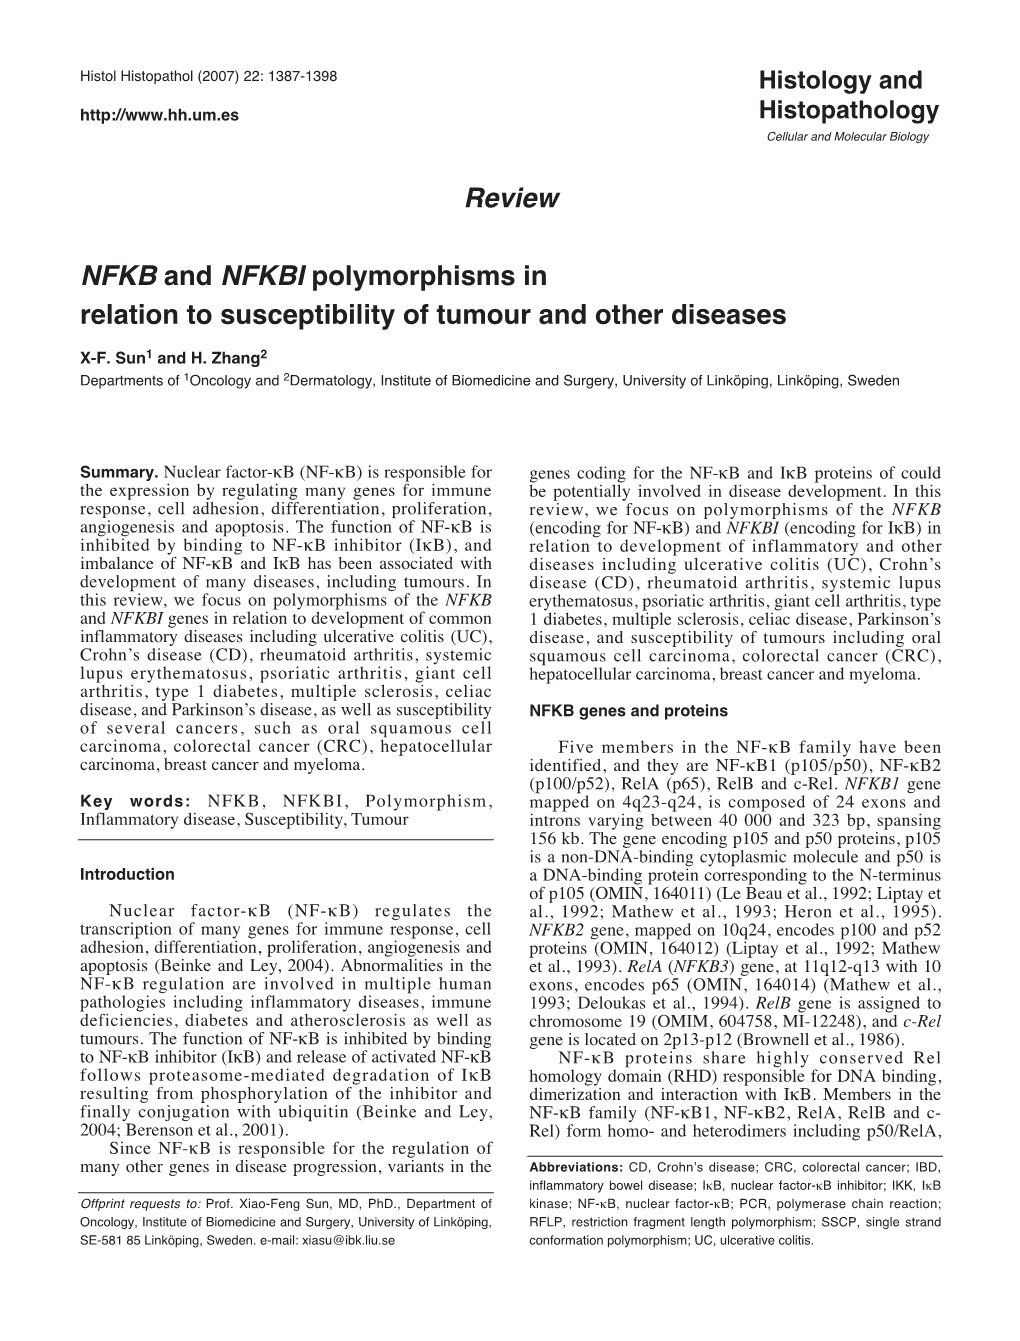 NFKB and NFKBI Polymorphisms in Relation to Susceptibility of Tumour and Other Diseases X-F